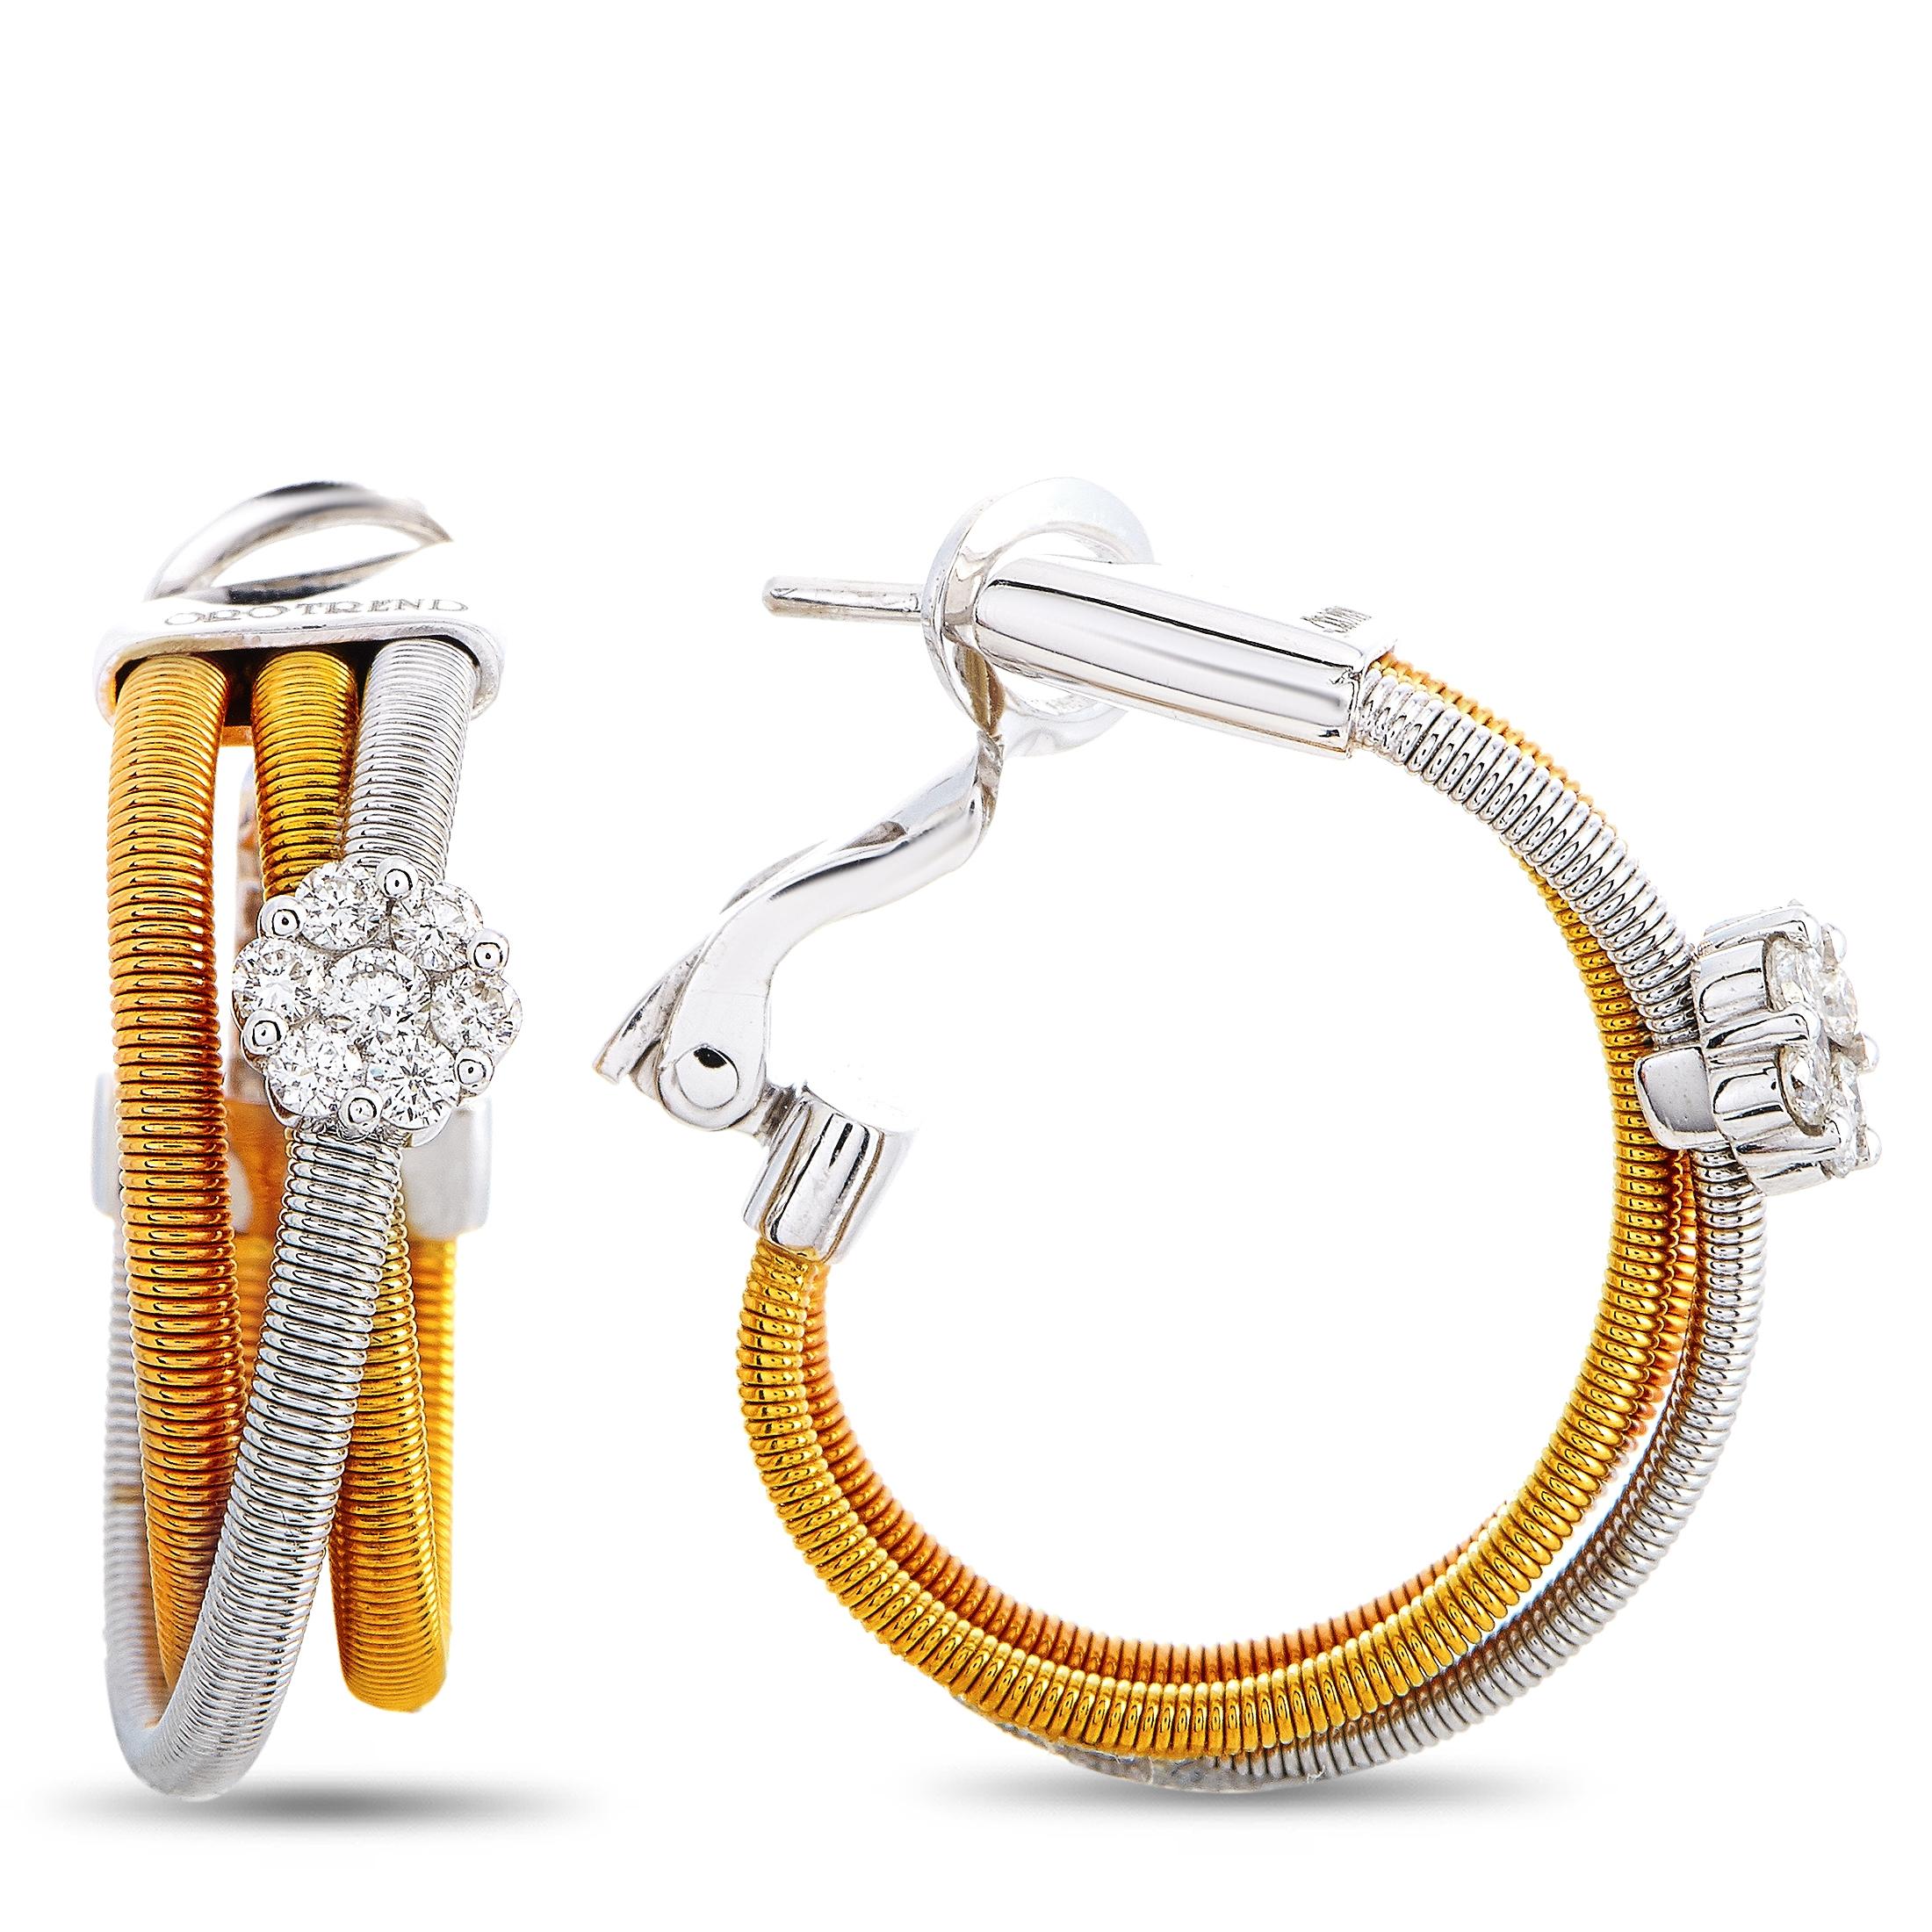 These Oro Trend hoop earrings are made out of 18K white, yellow and rose gold and set with diamonds that total 0.45 carats. The earrings measure 1” in length and 0.37” in width and each of the two weighs 8.5 grams.
 
 The pair is offered in brand